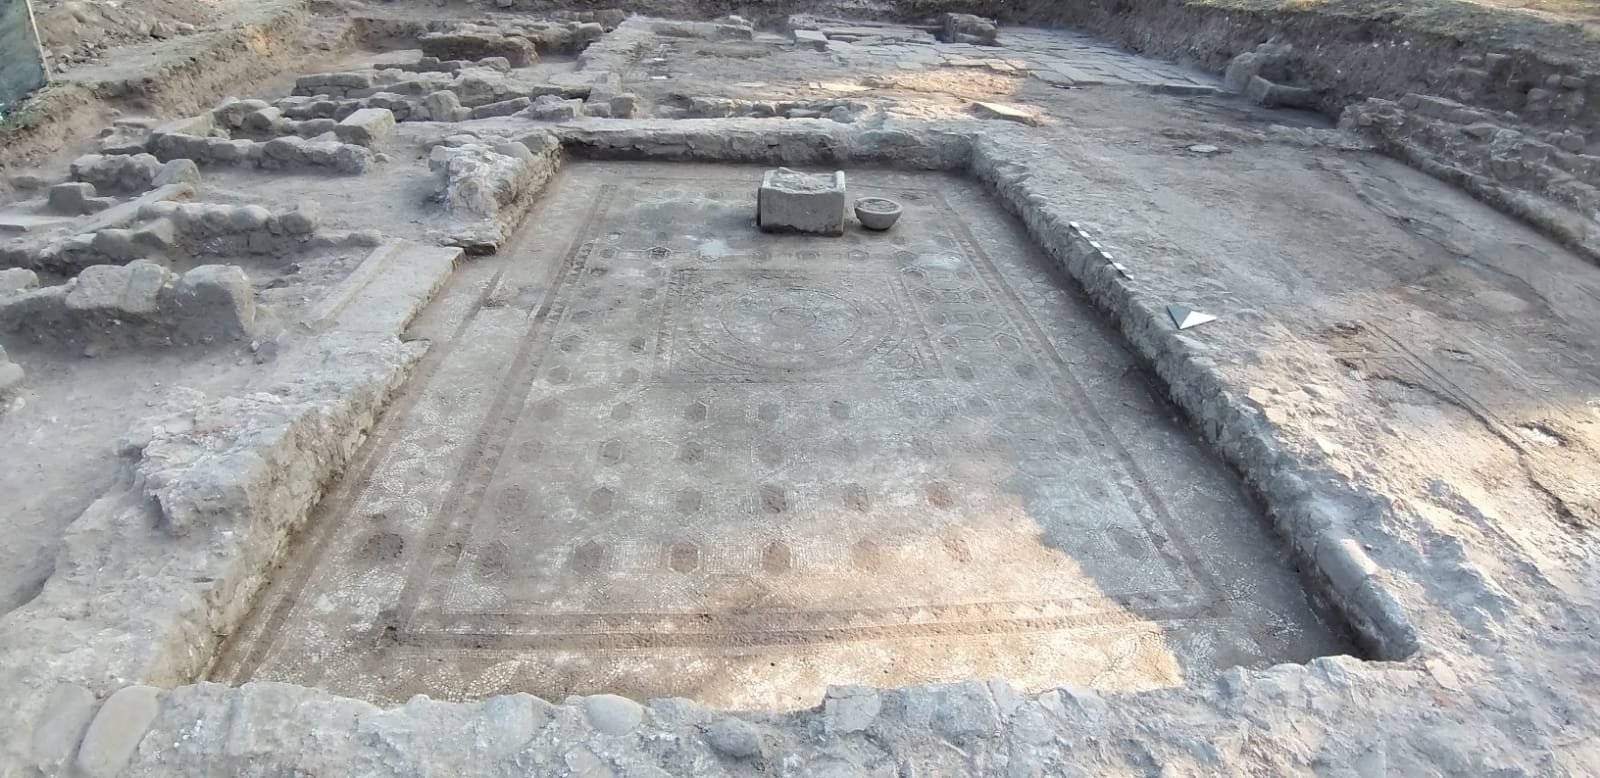 1,800-year-old geometric patterned mosaic